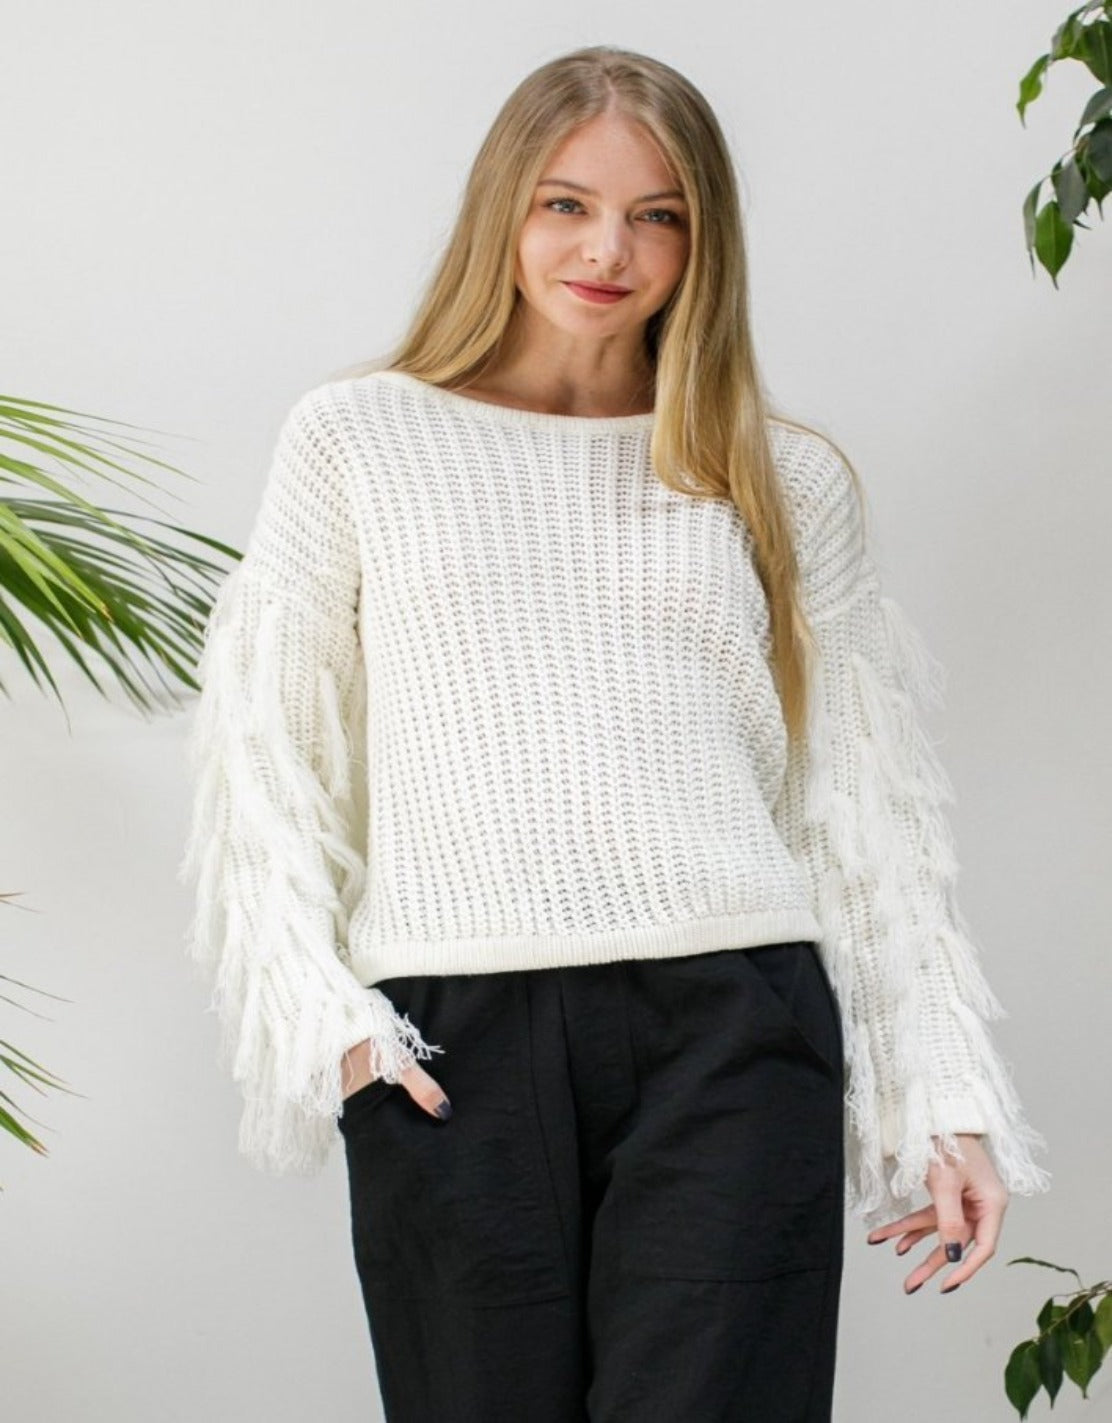 All About The Fringe Sweater